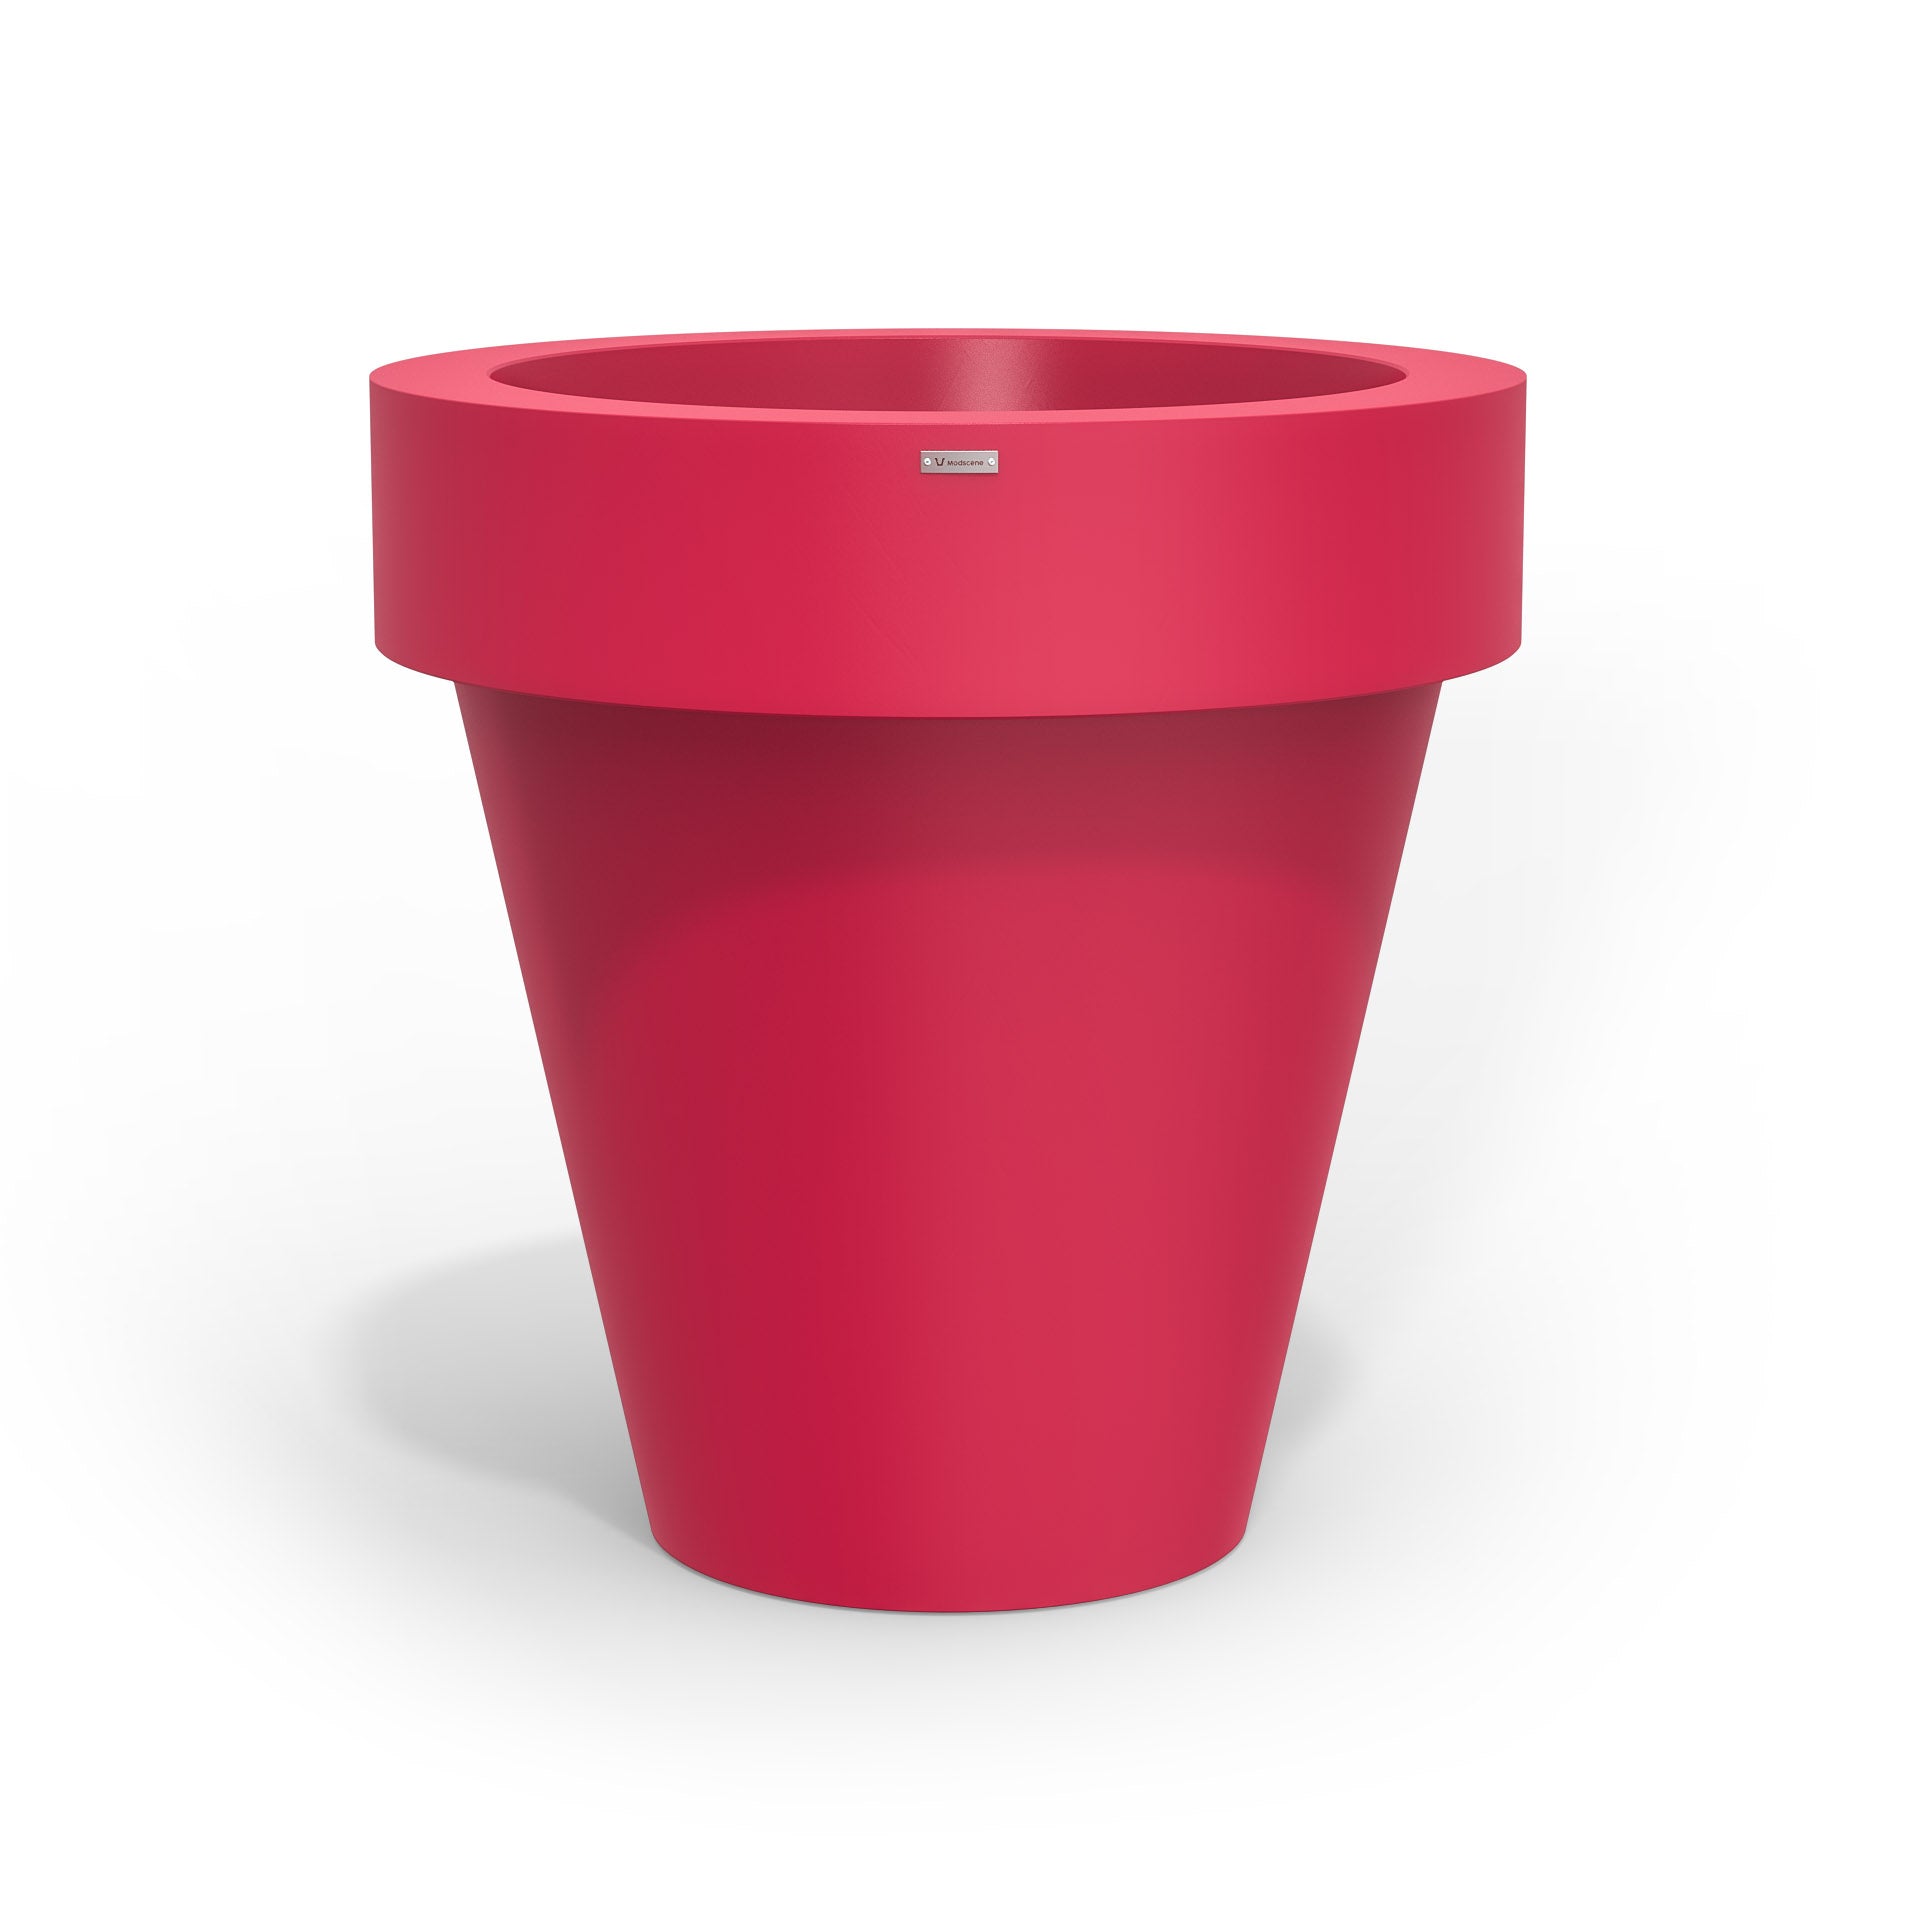 Extra large Modscene planter pot in a pink colour. Made in NZ.